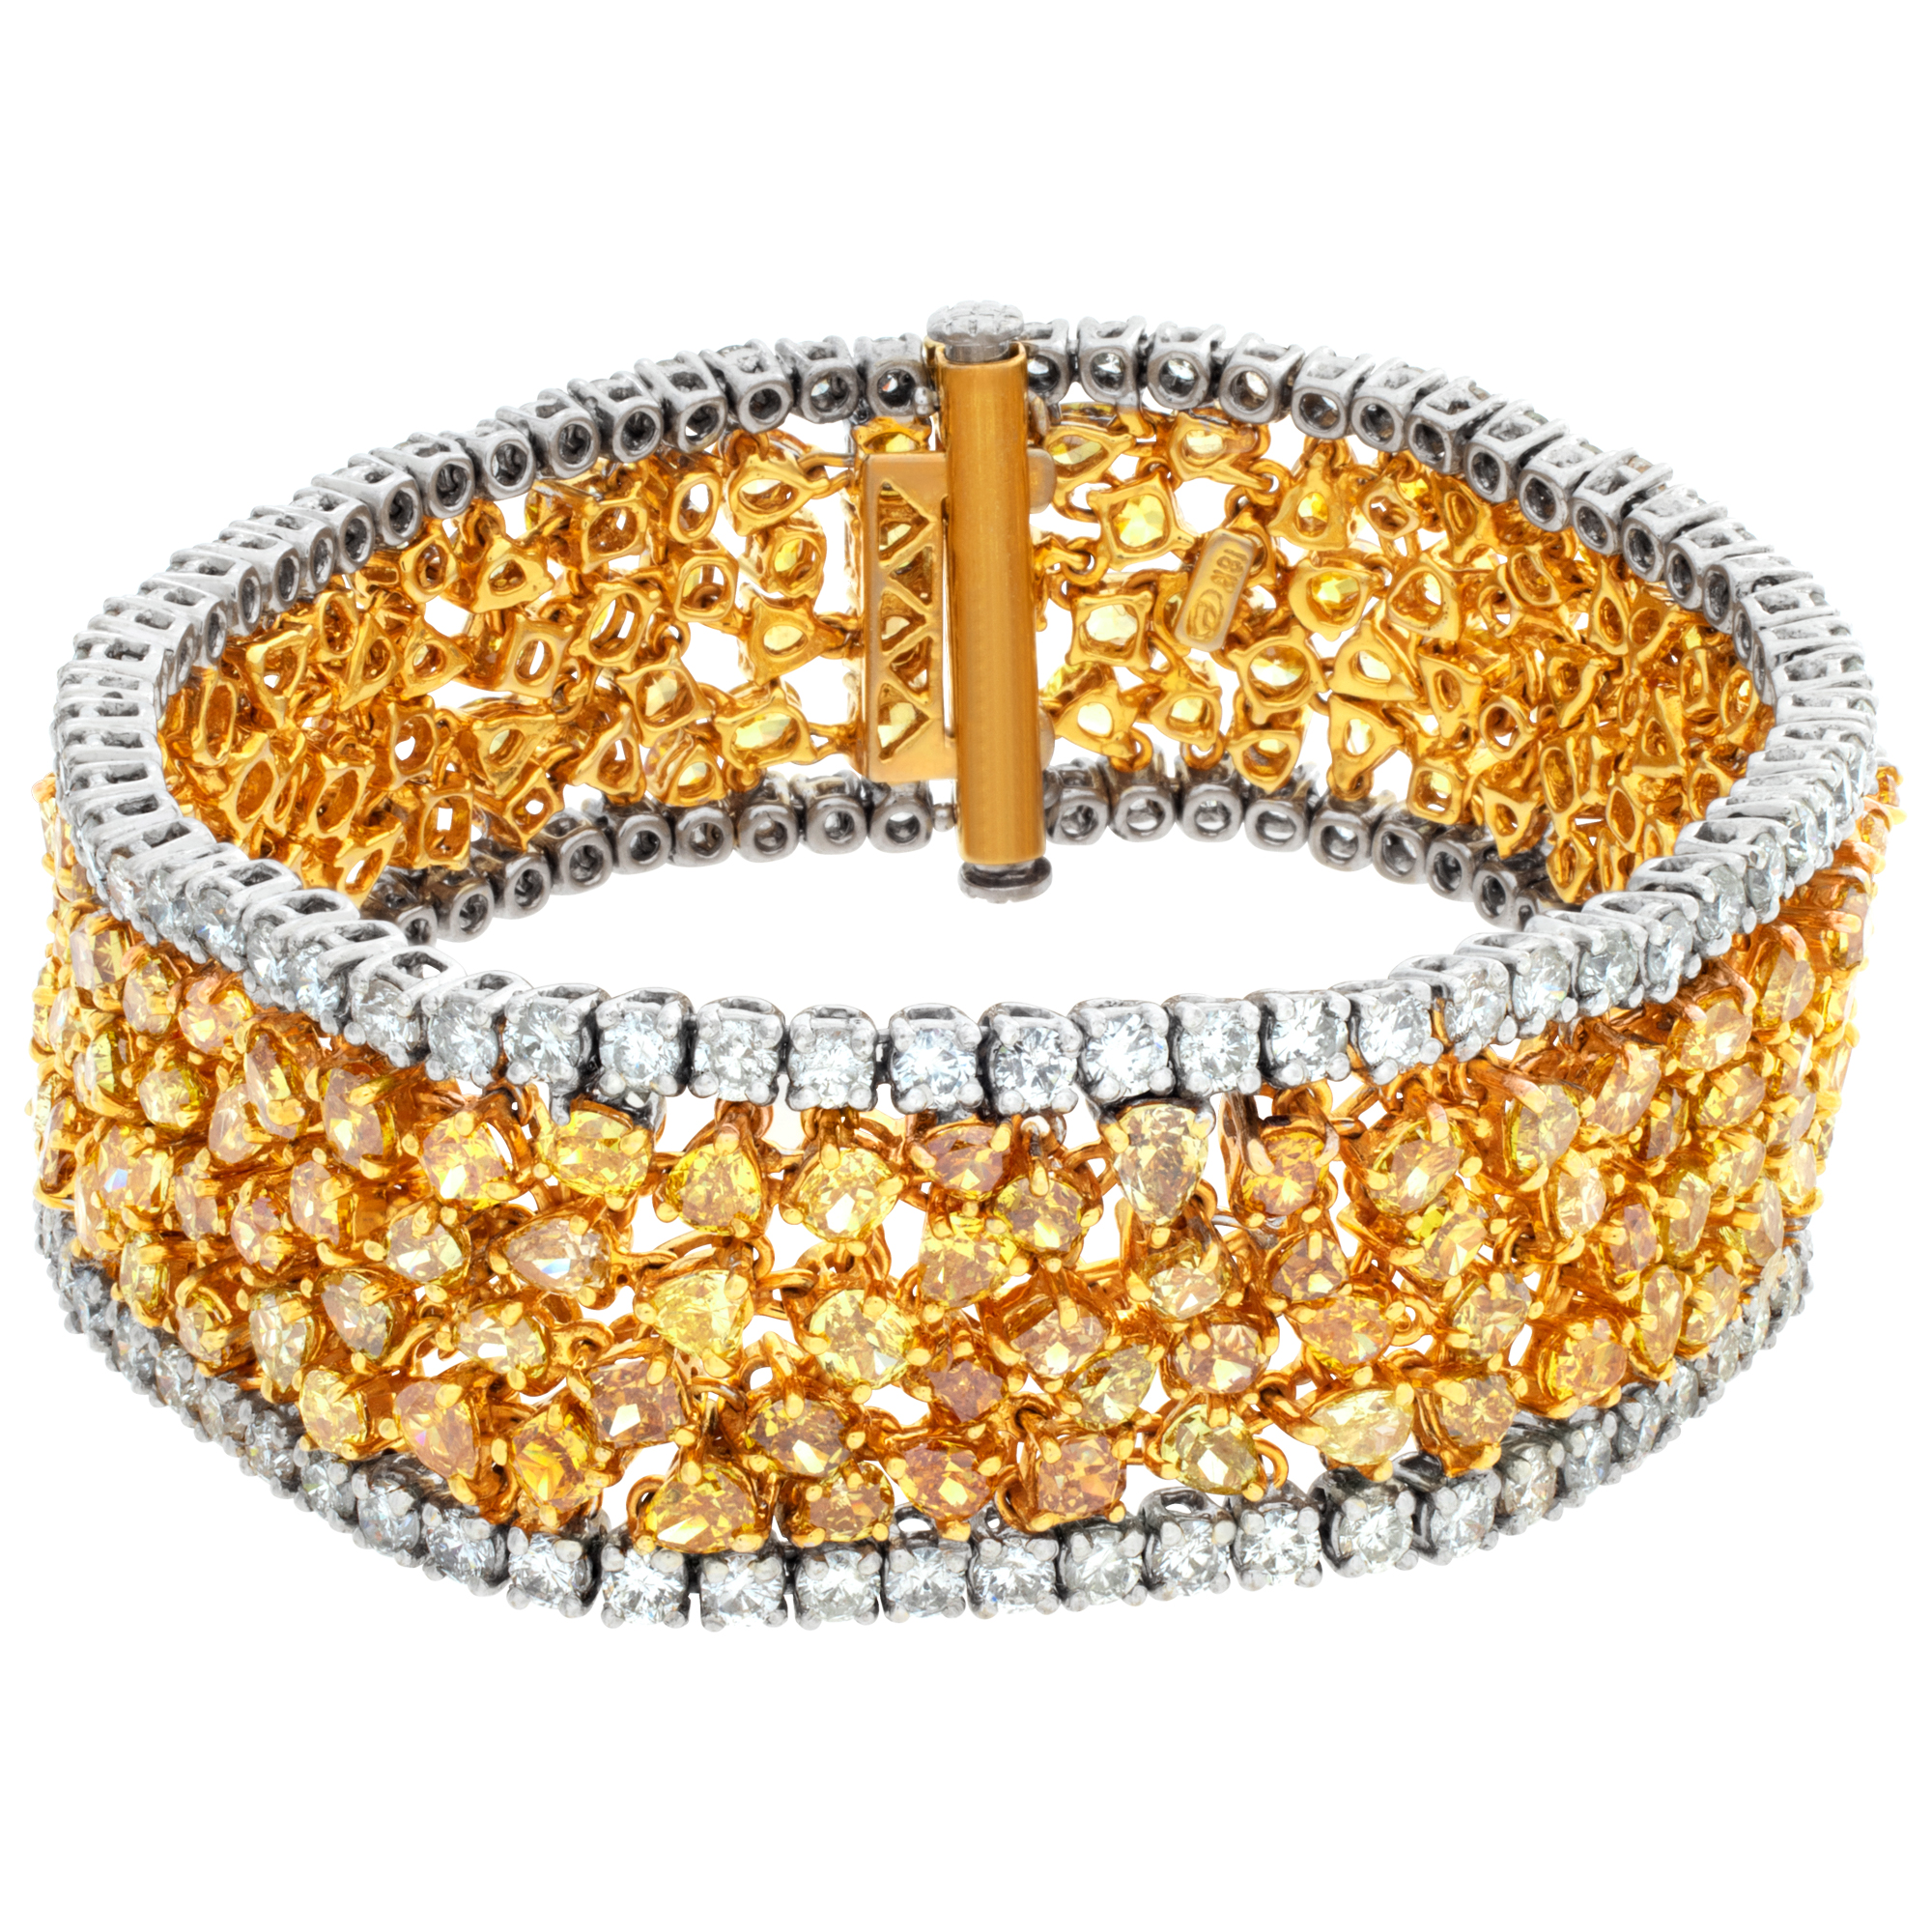 Stunning 18k white and yellow gold bracelet with white and fancy diamonds